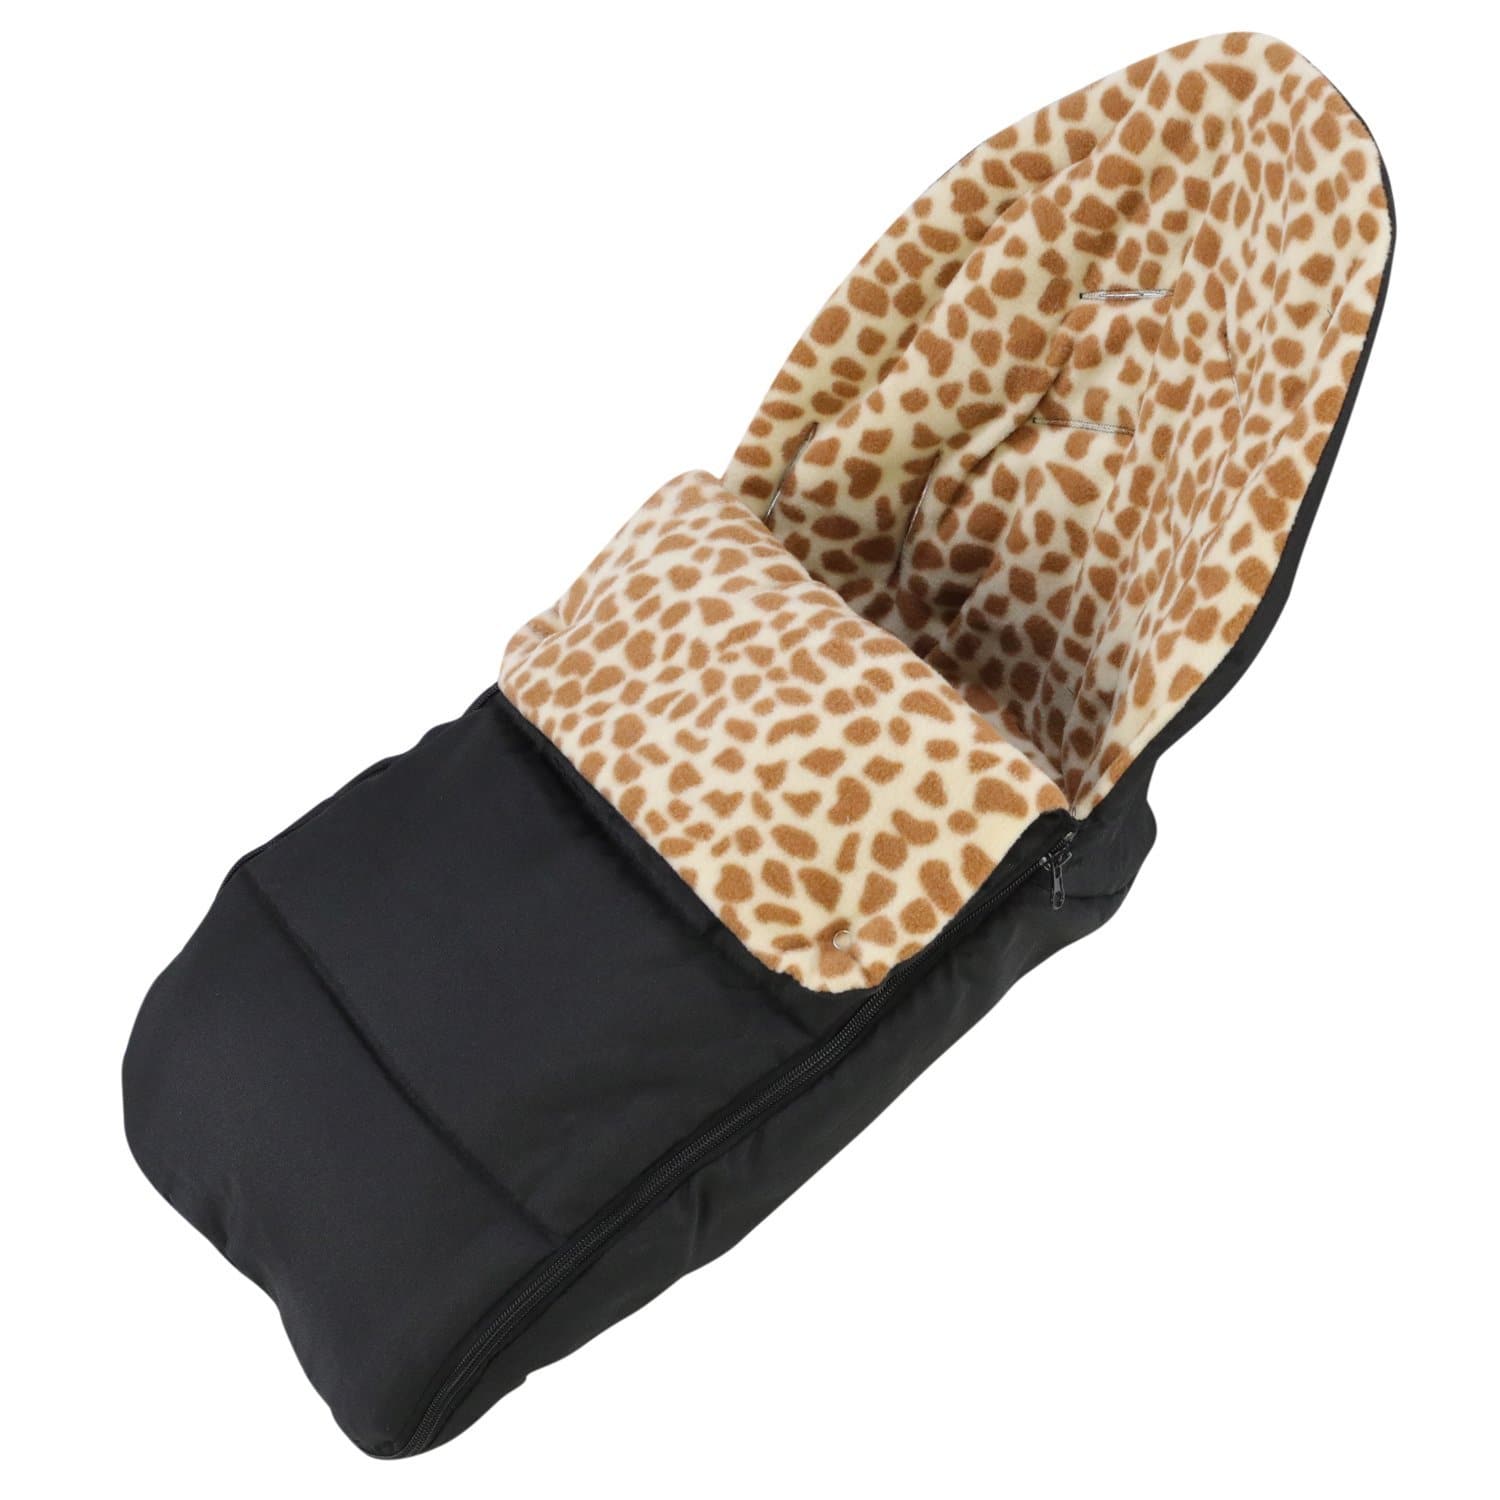 Animal Print Car Seat Footmuff / Cosy Toes Compatible with Doona - Fits All Models - For Your Little One